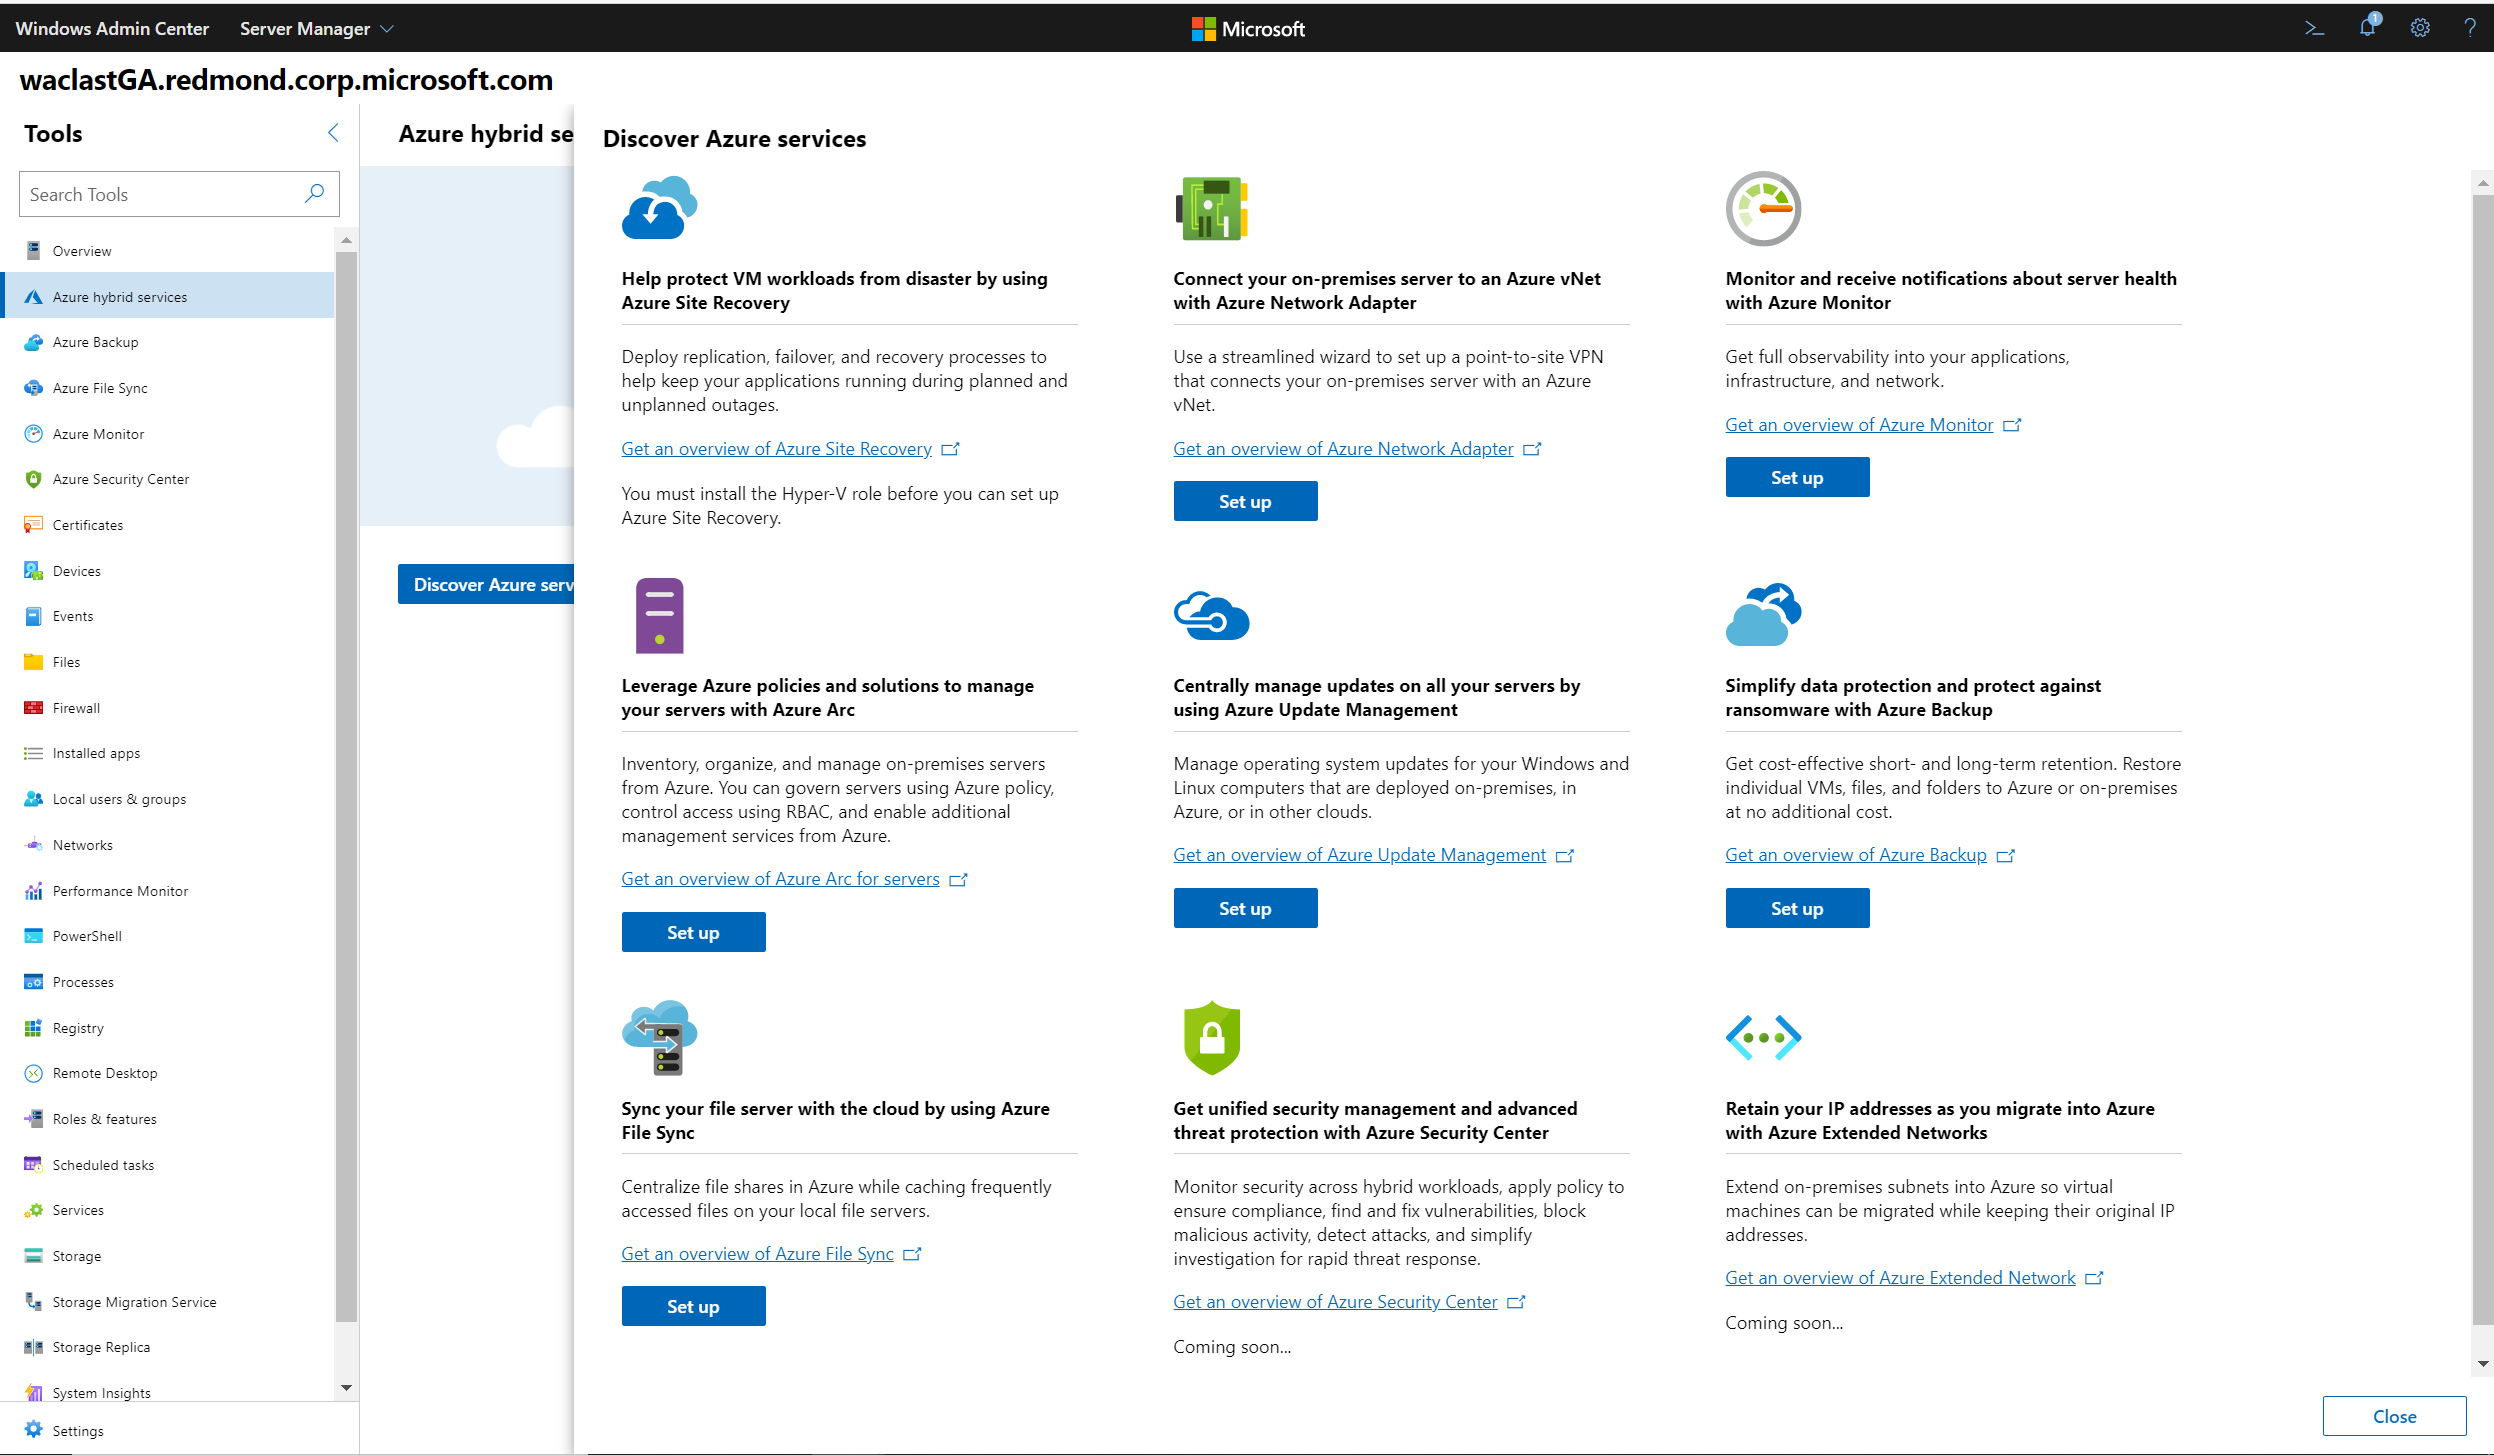 Connecting Windows Server to Azure hybrid services | Microsoft Learn